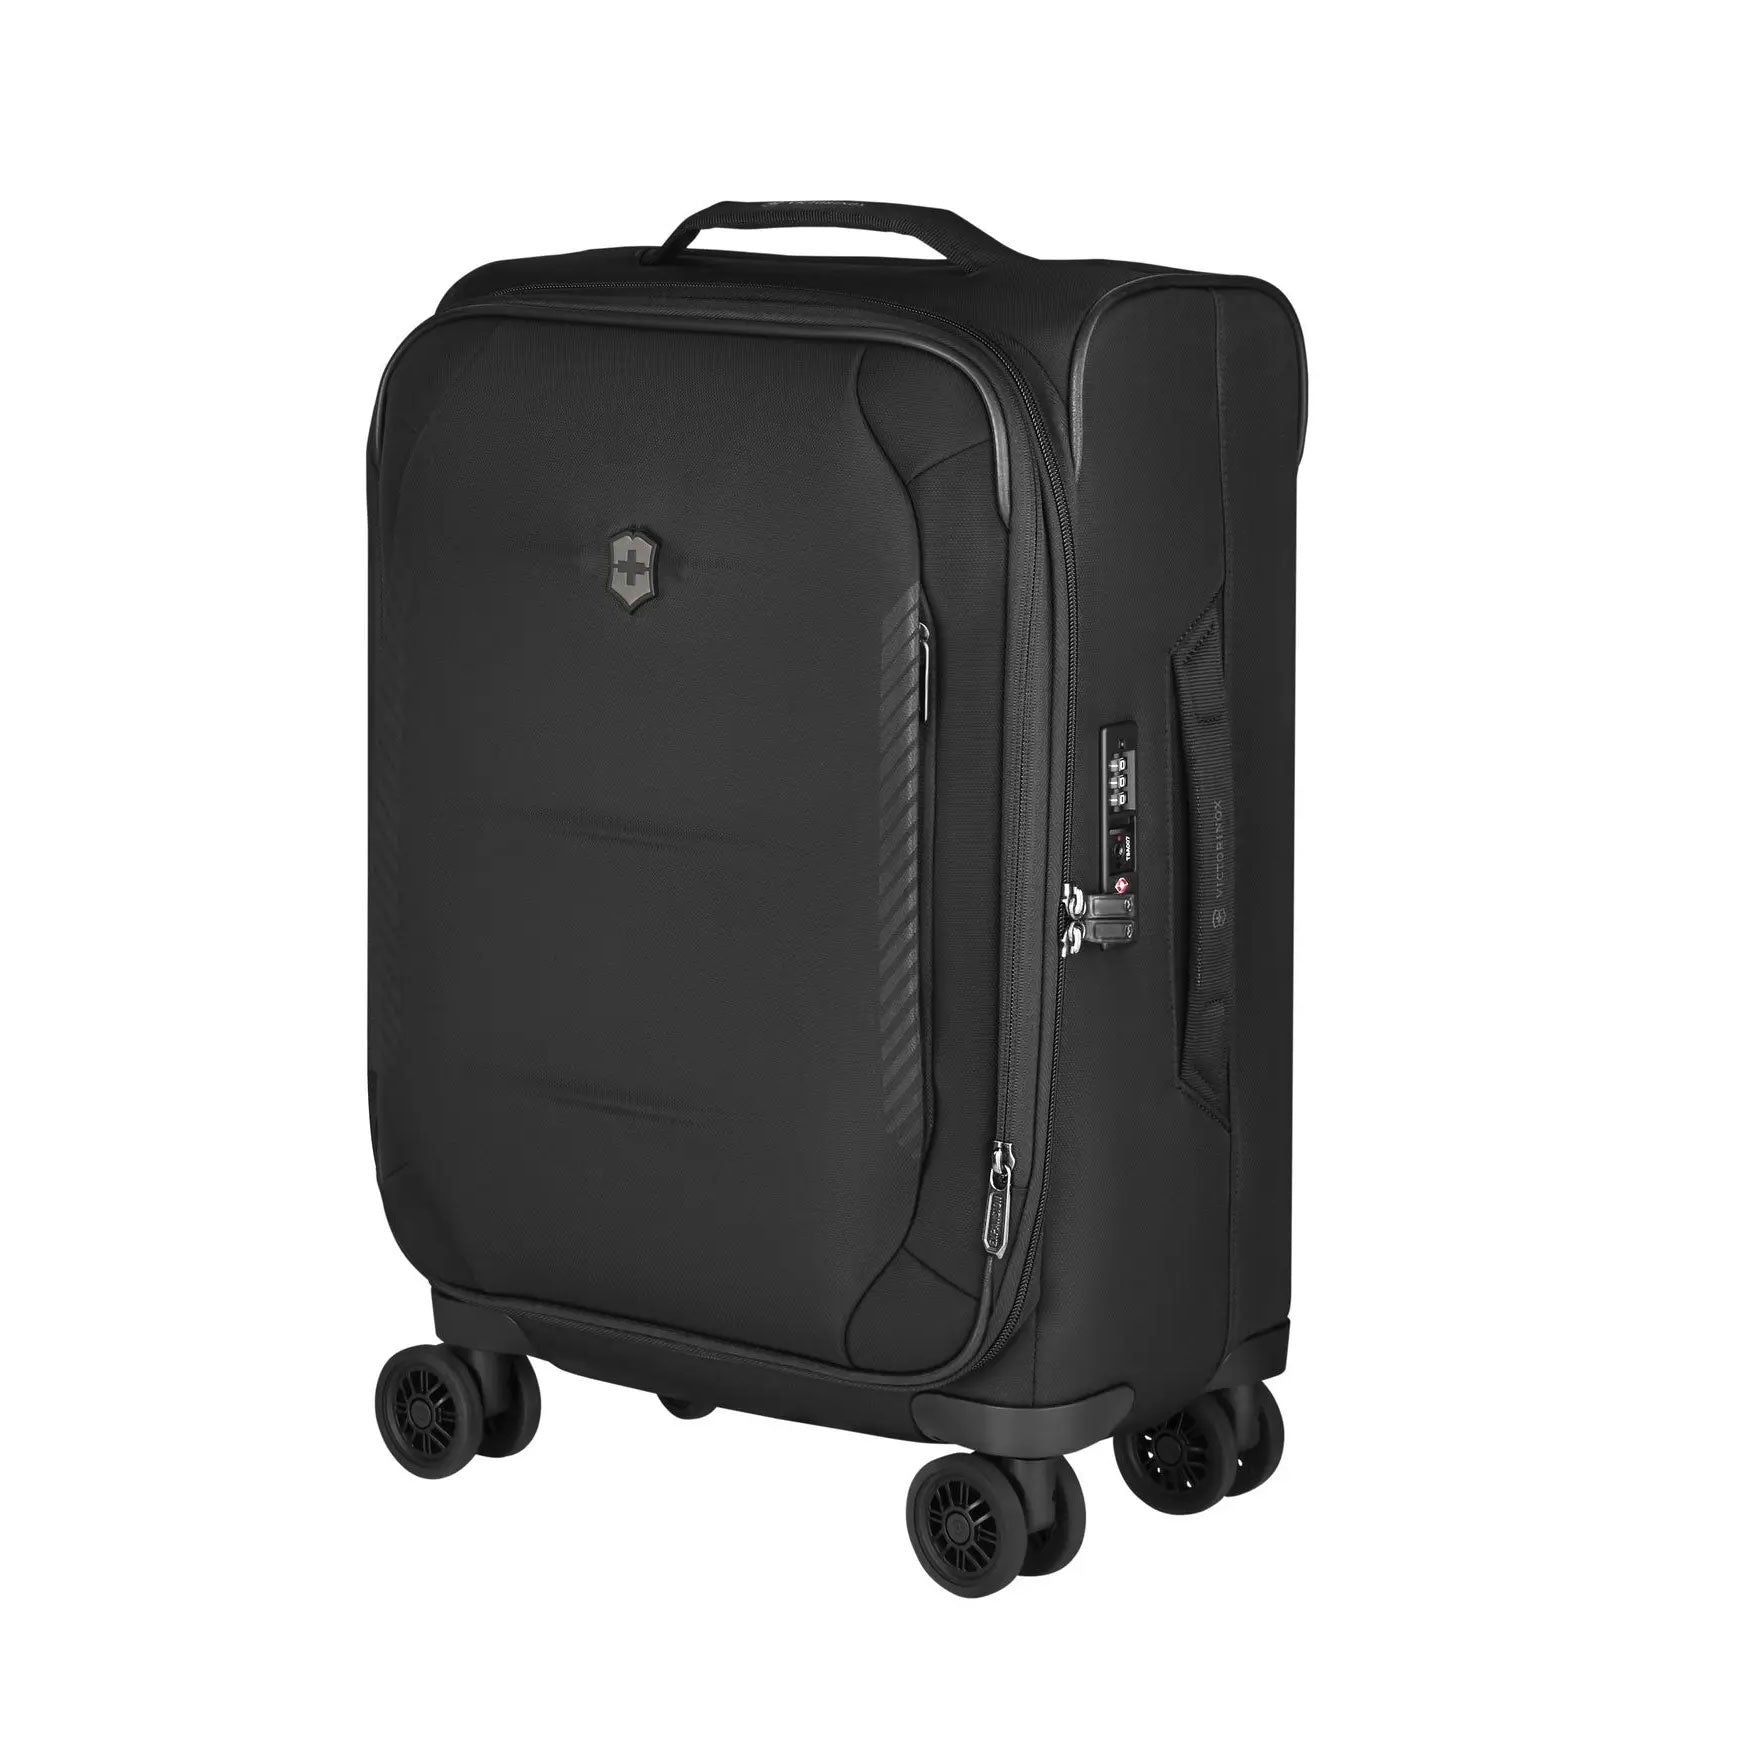 Victorinox Swiss Army Crosslight Frequent Flyer Softside Carry-On